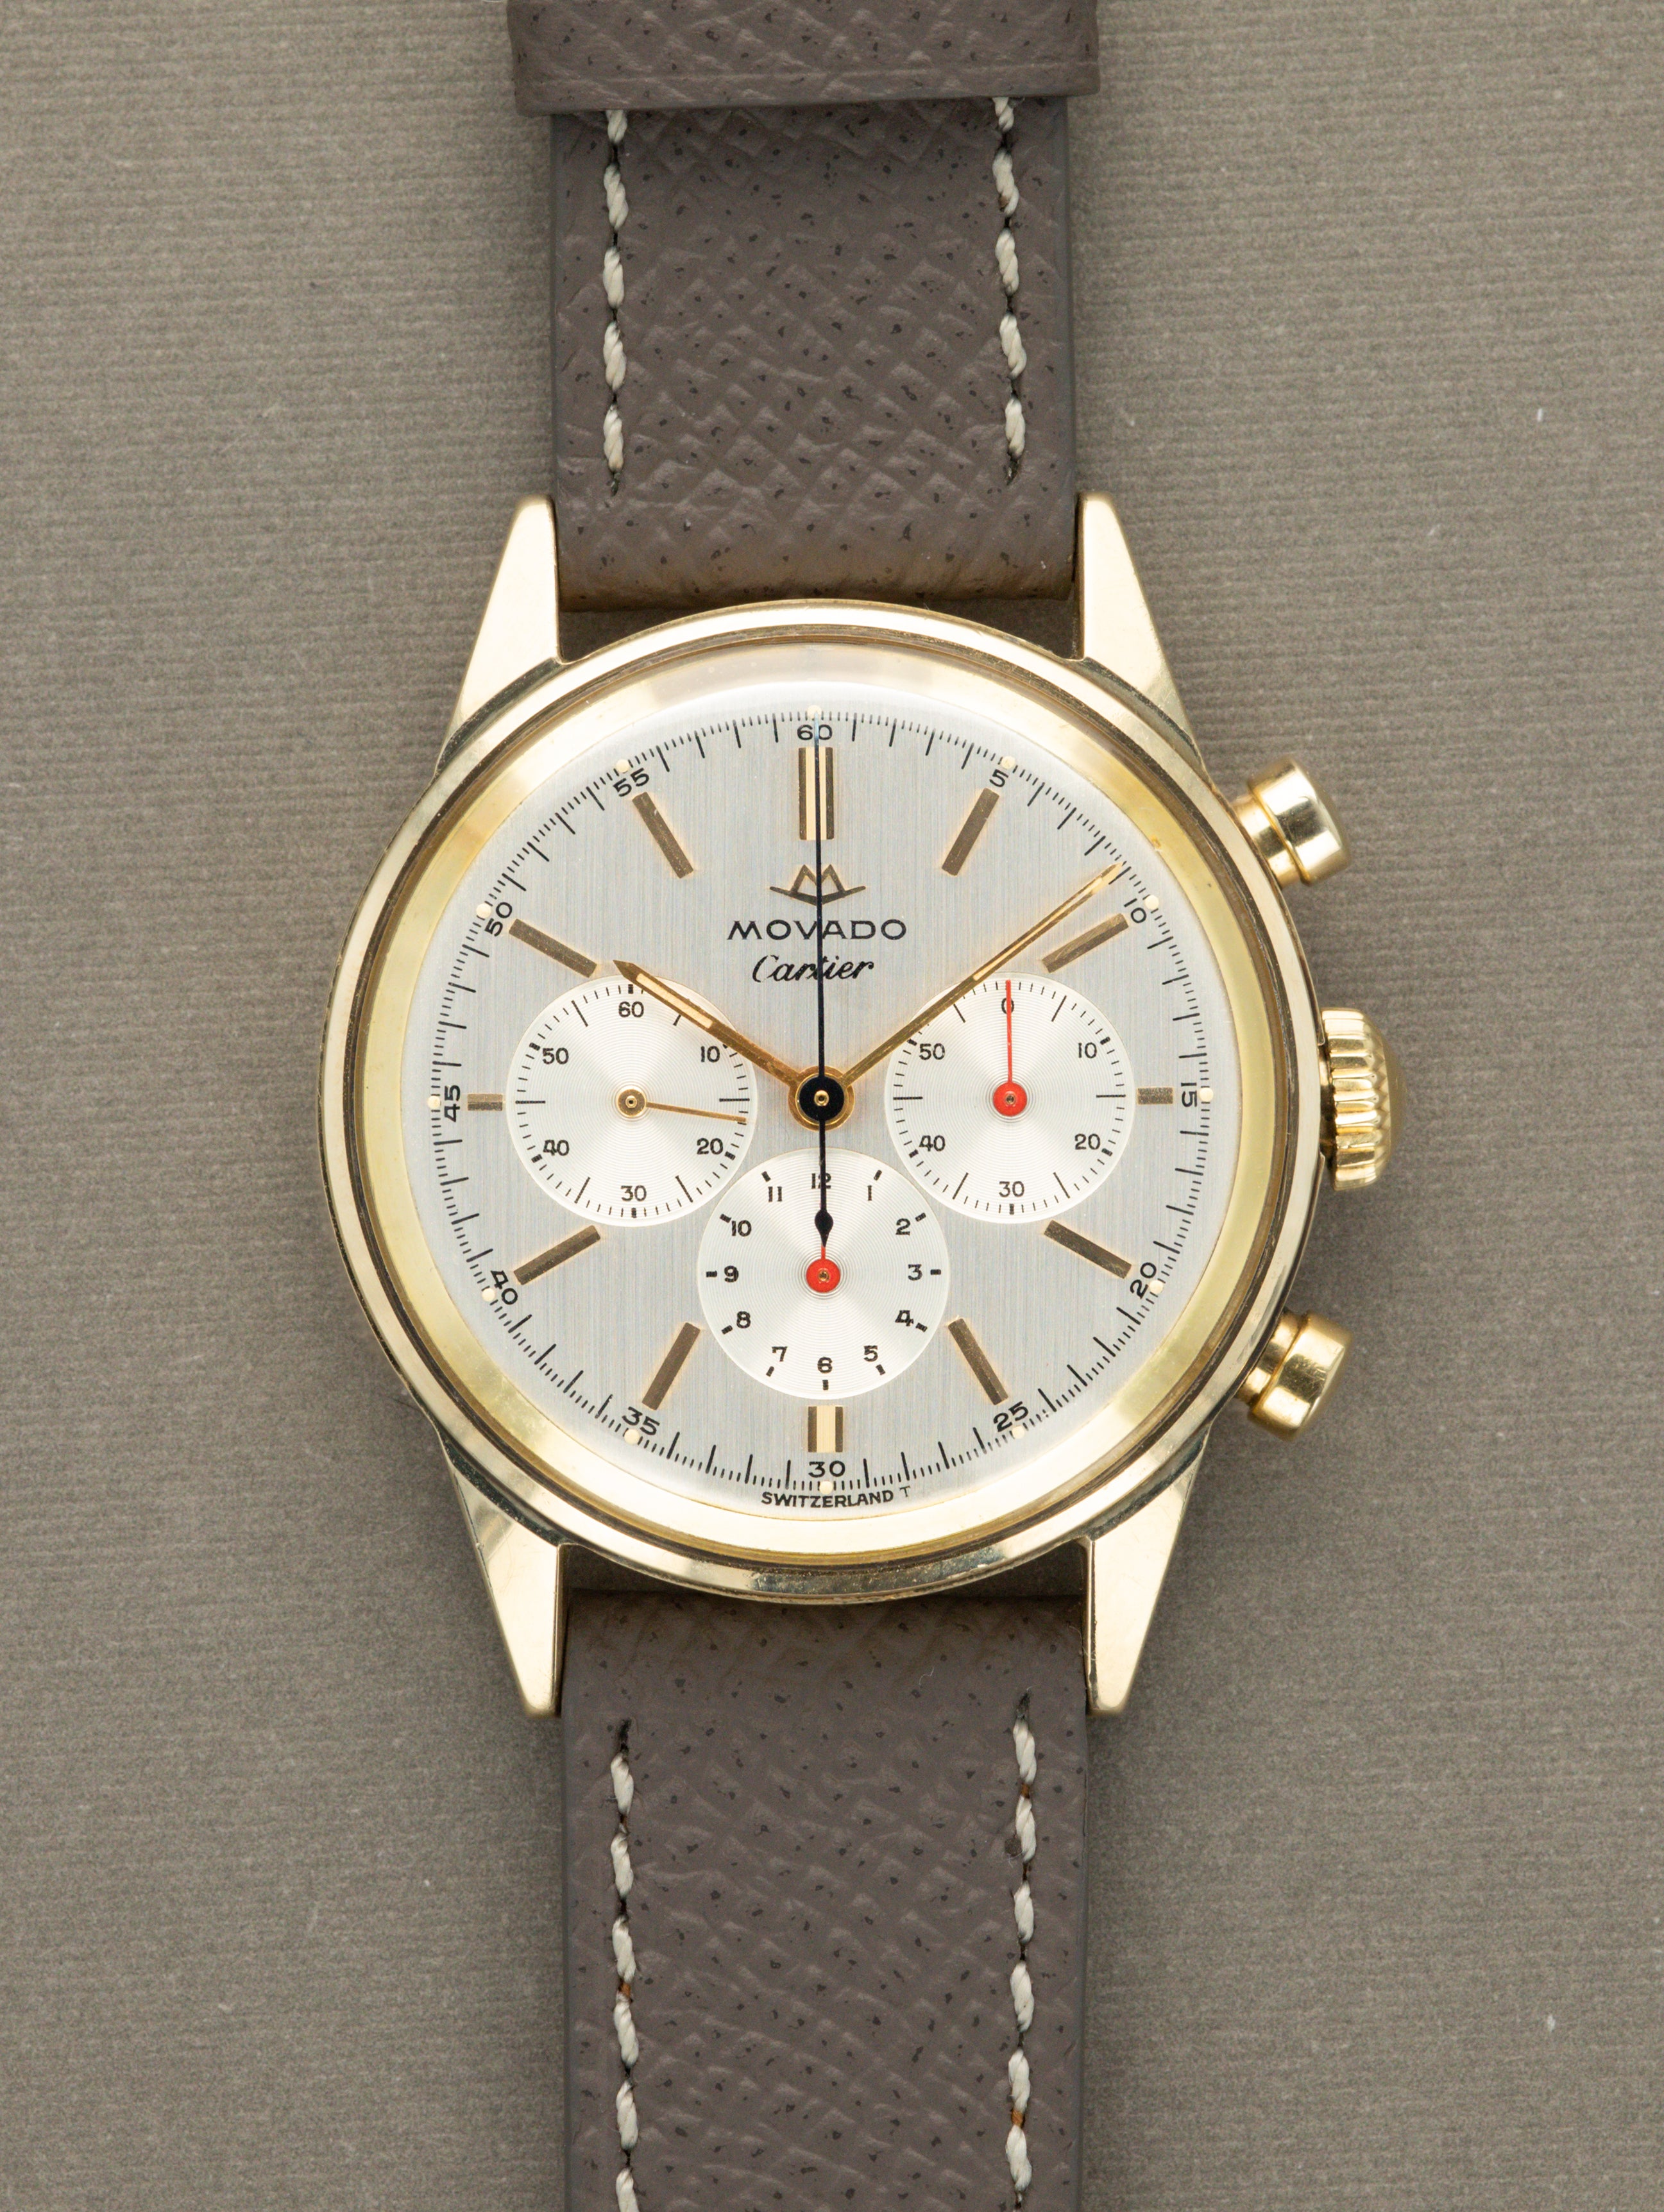 Movado M95 14K Chronograph - Retailed by Cartier